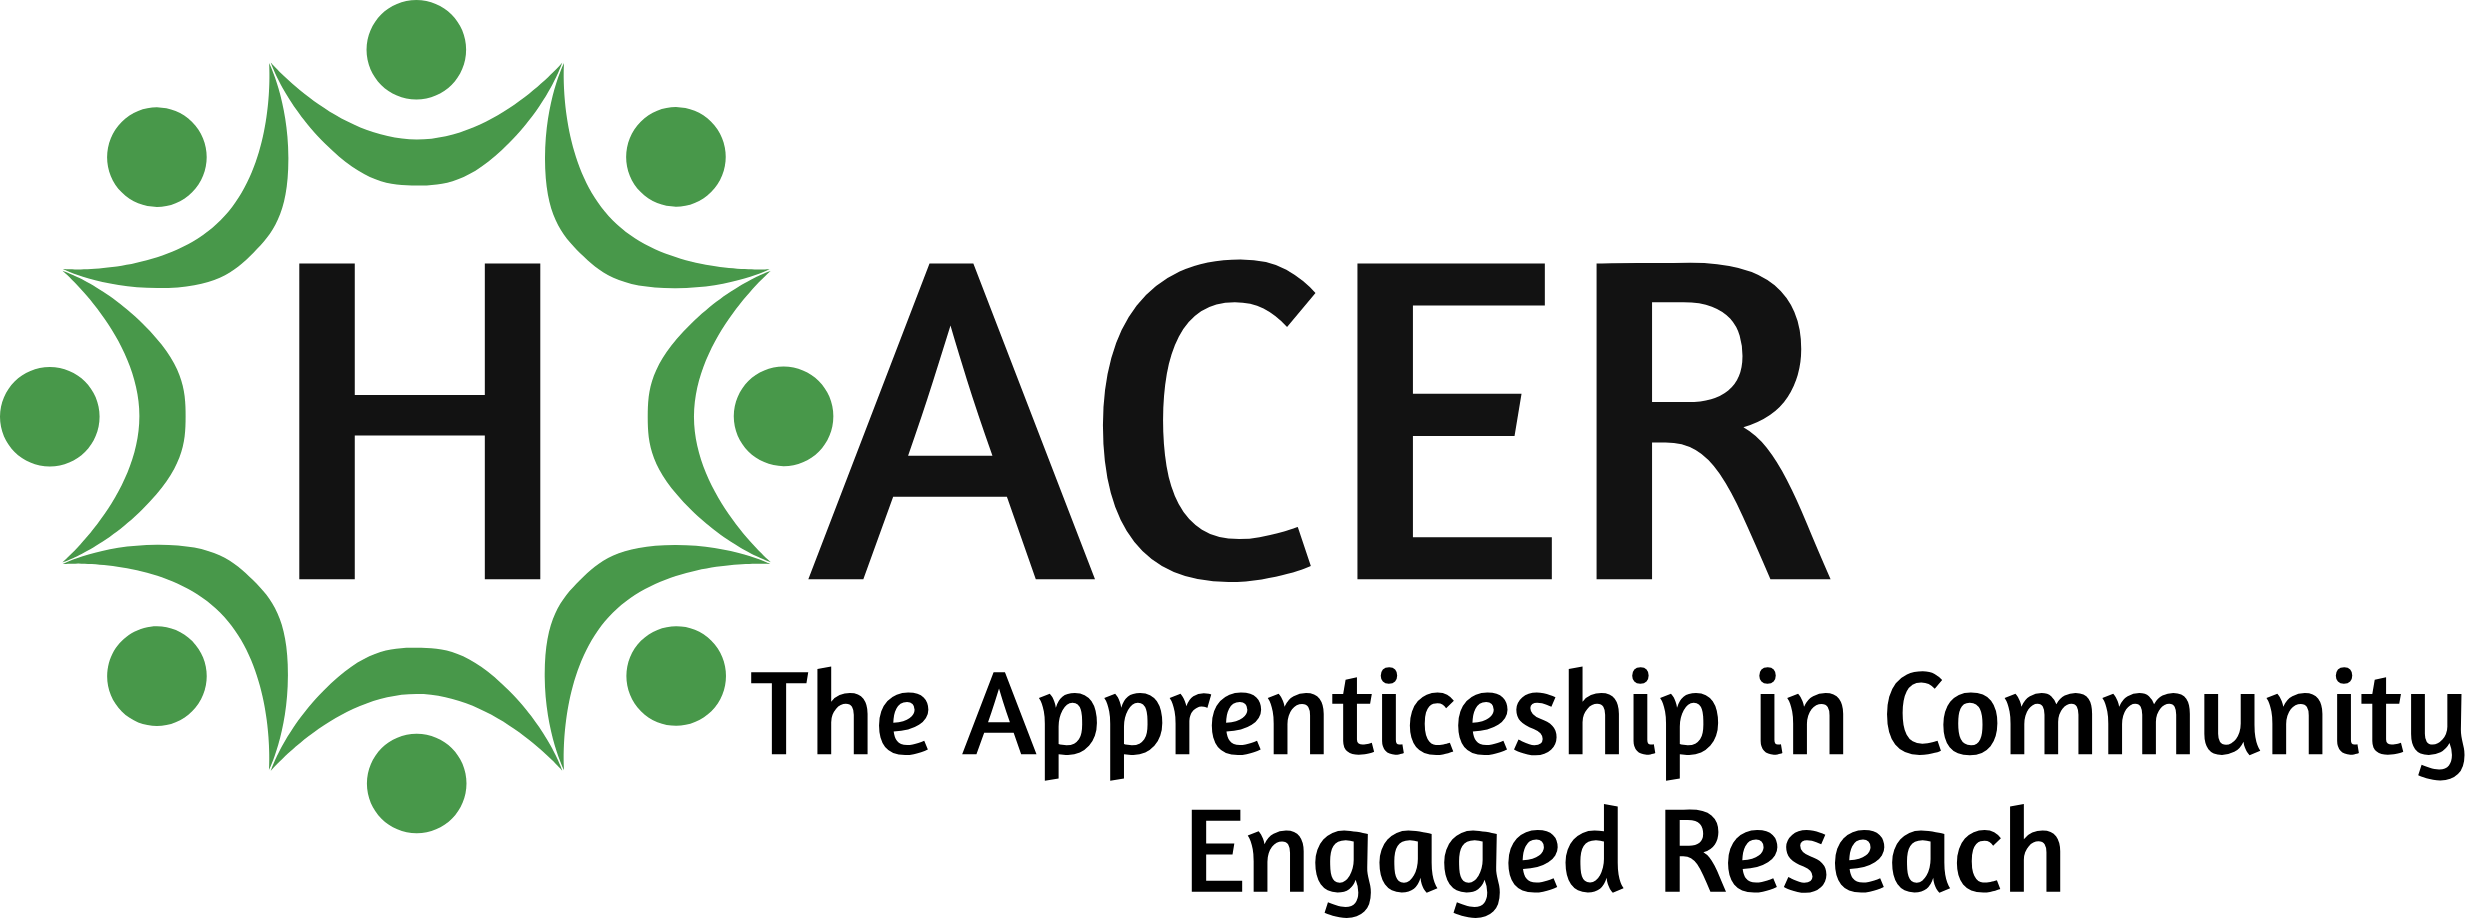 Picture of the (H)ACER logo 